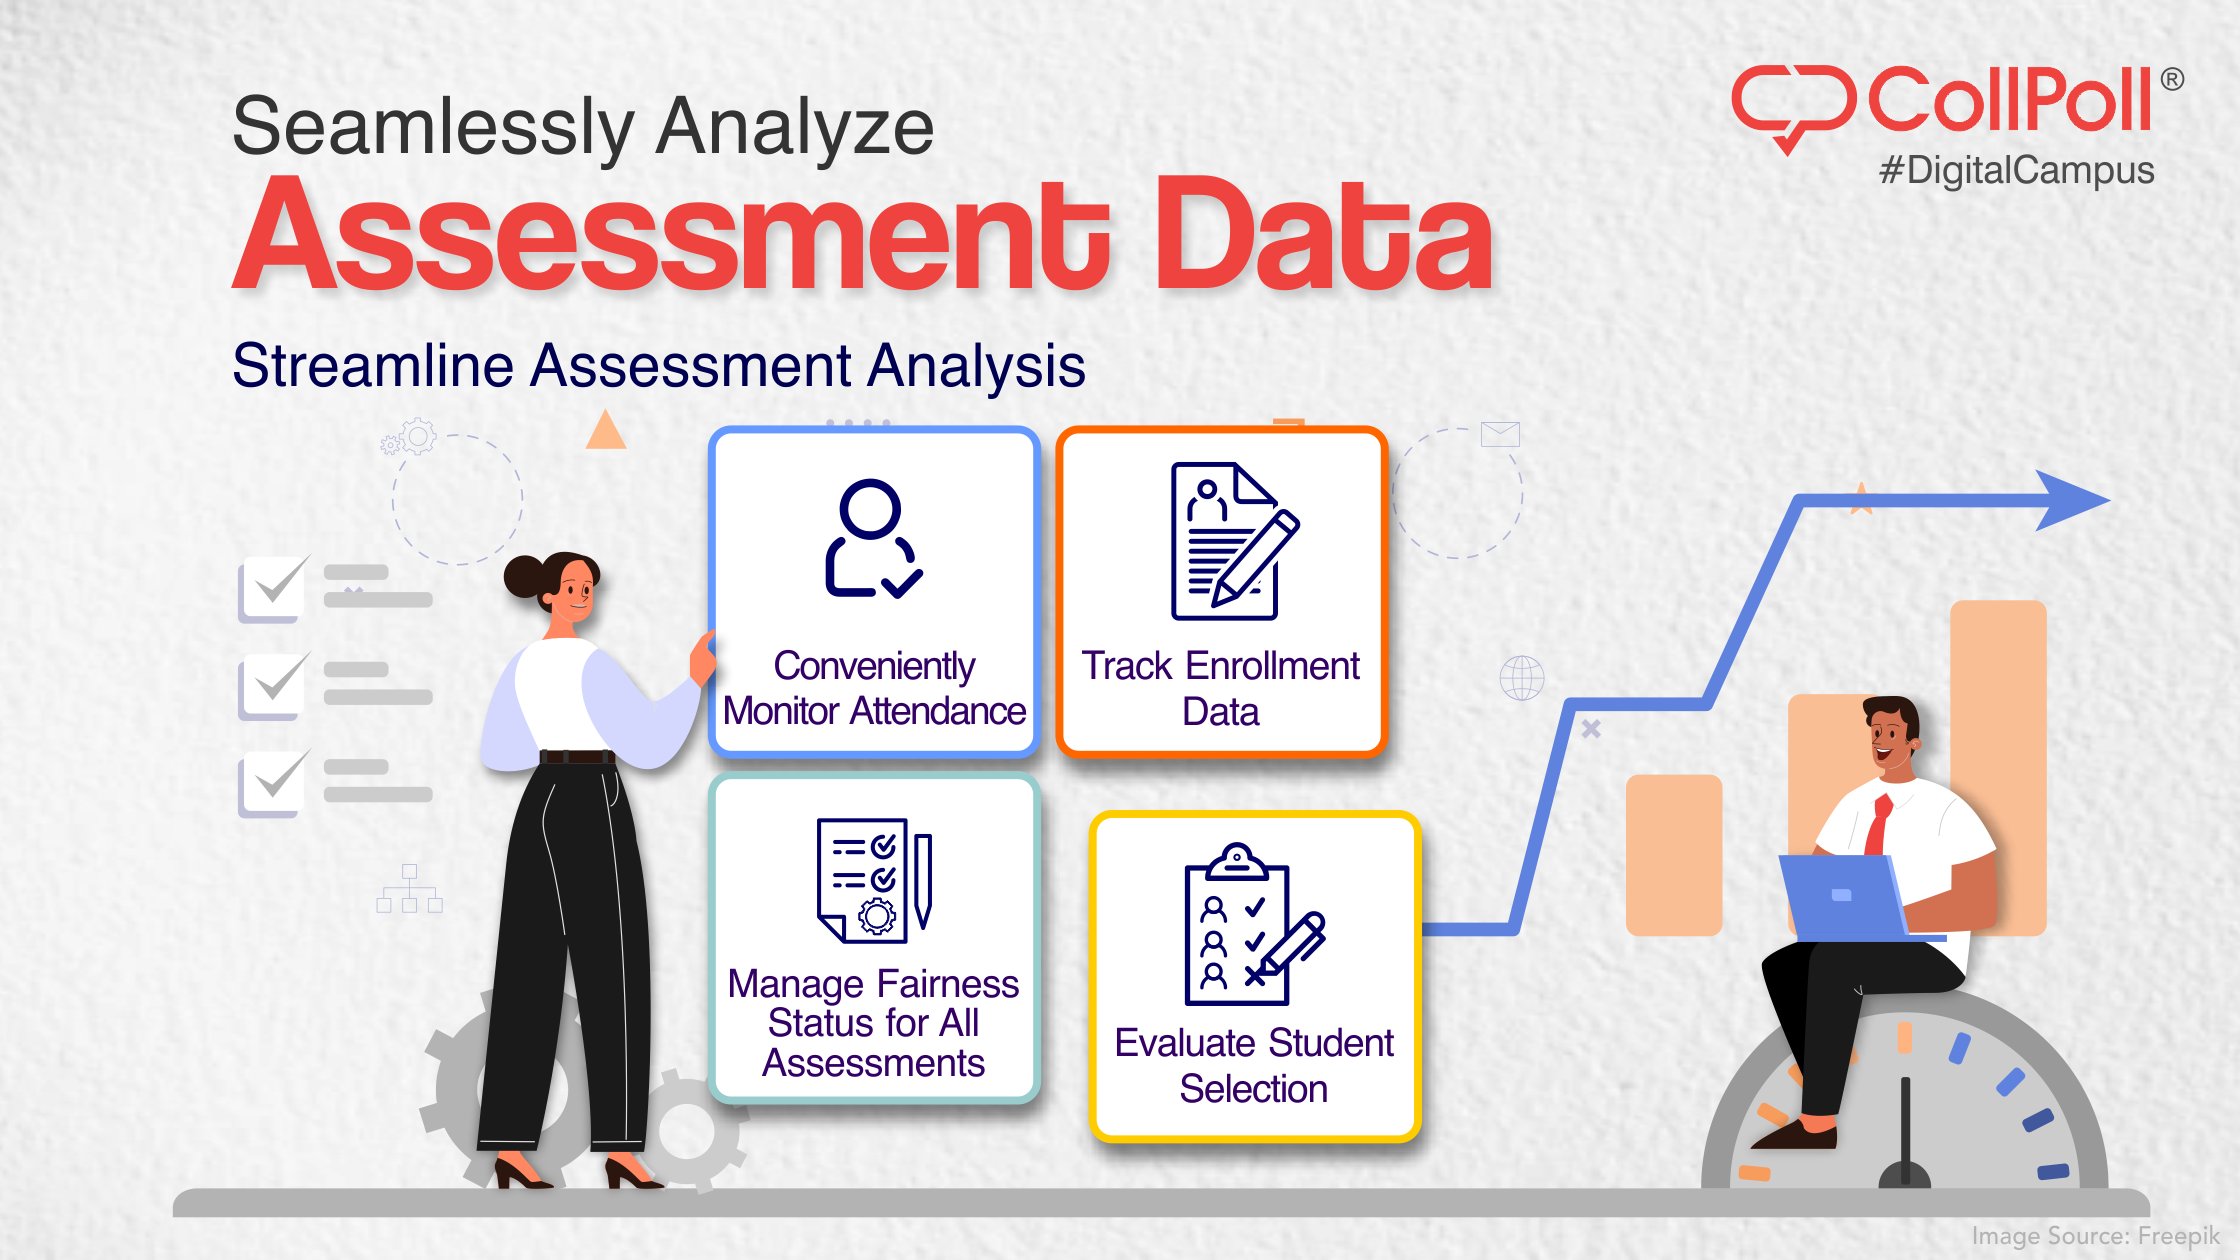 Improved Efficiency of Assessment Analysis